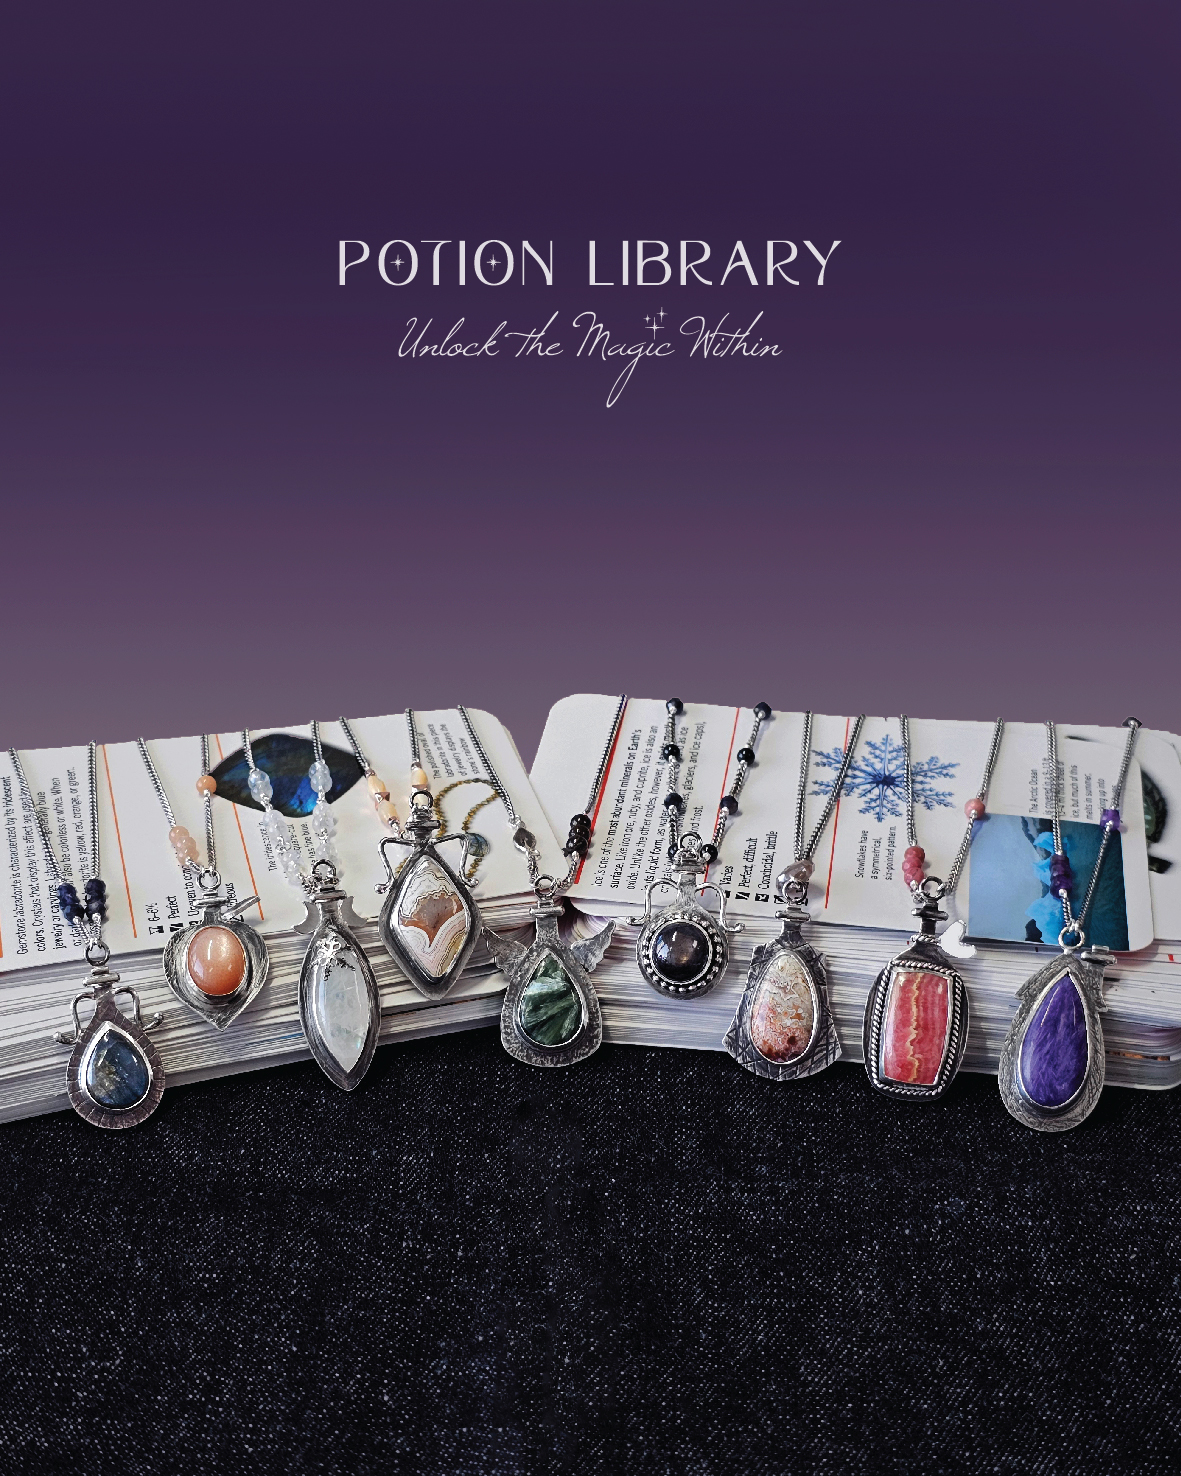 potion library - unlock the magic within - handmade sterling silver potion vial pendant necklaces